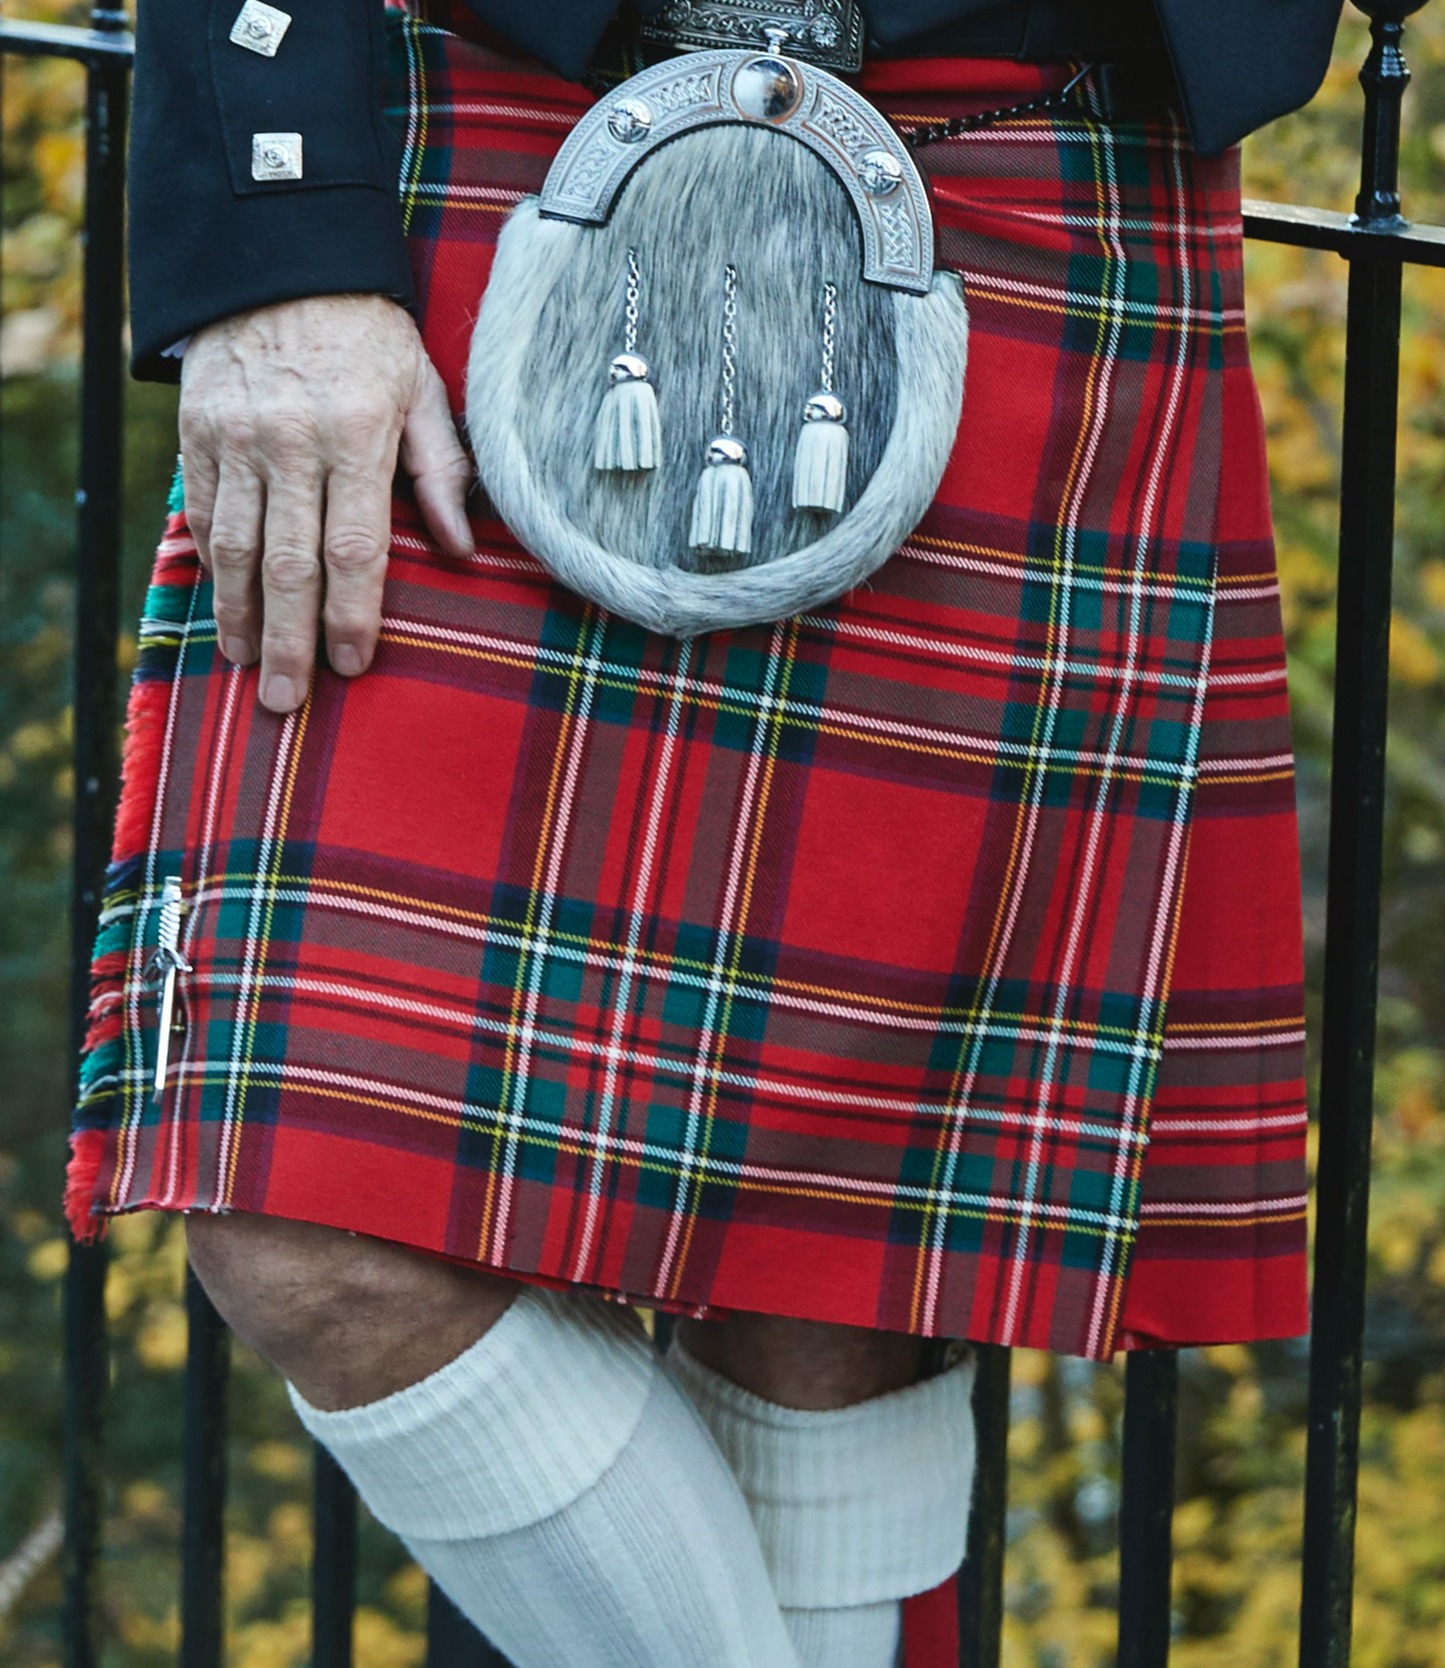 How should you store your kilt